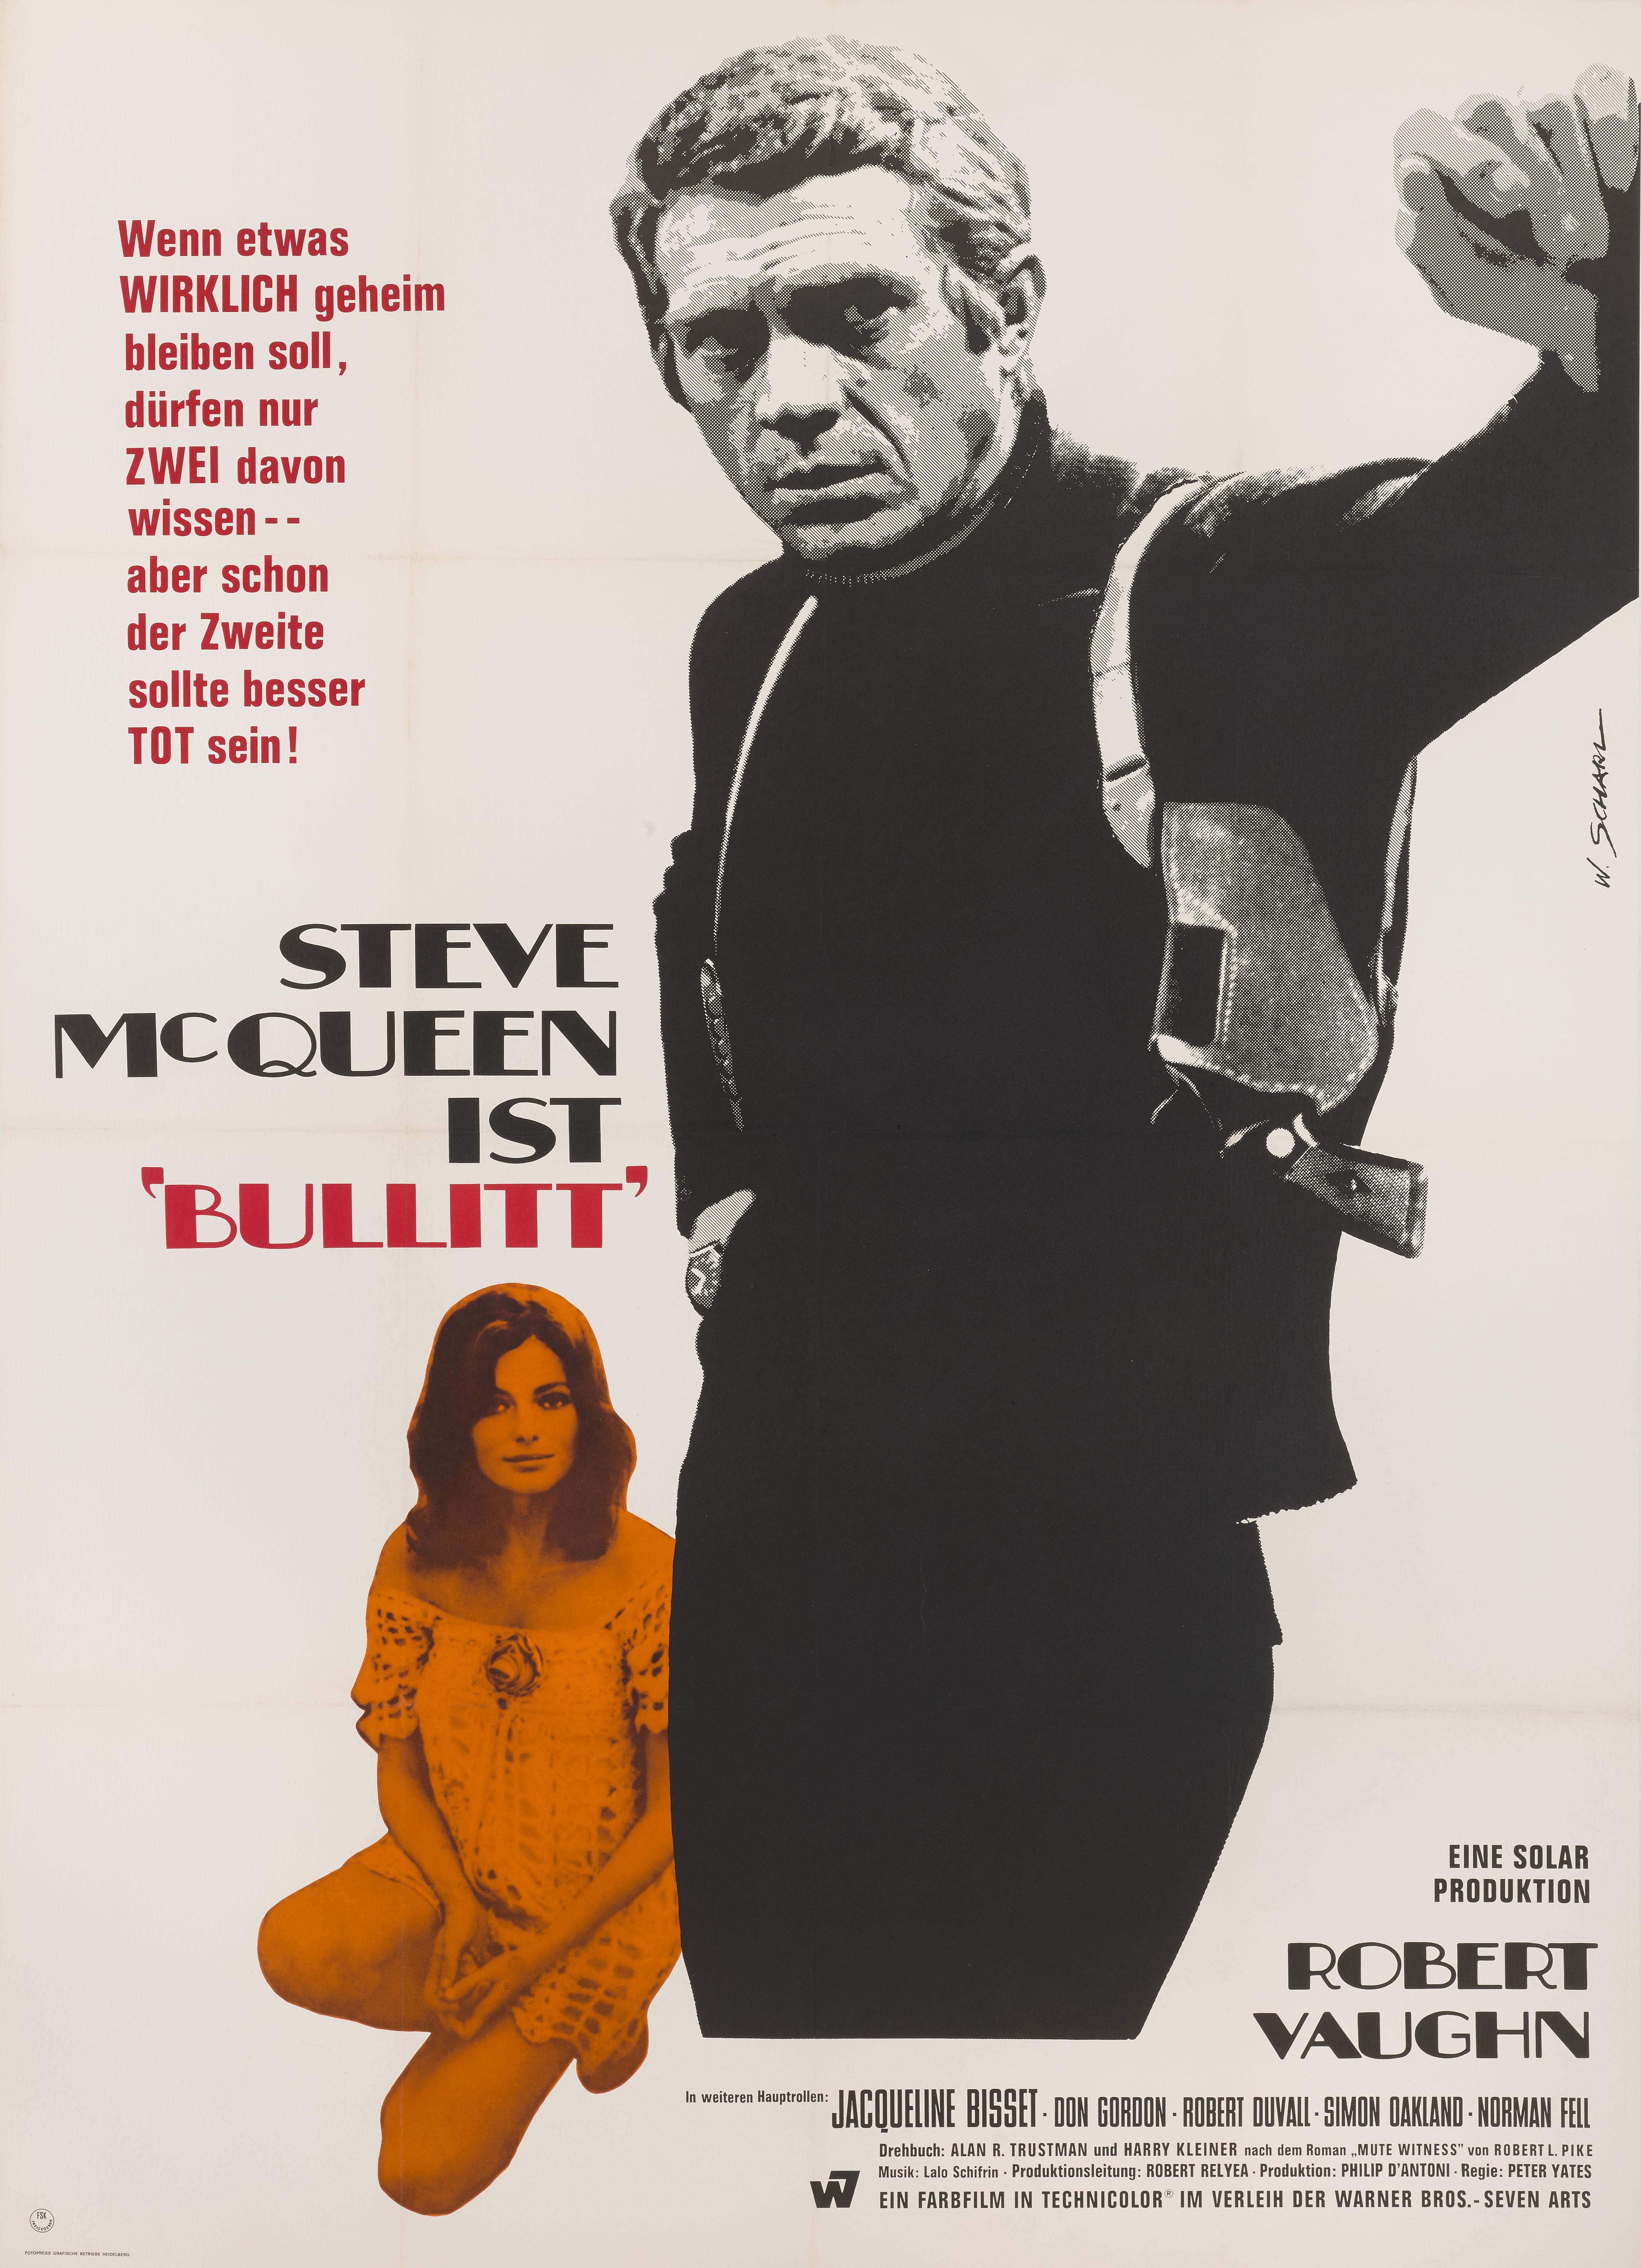 Original German film poster for the action thriller directed by Peter Yates, and stars Steve McQueen, Robert Vaughn and Jacqueline Bisset. It is undoubtedly Steve McQueen's most famous role, where he plays San Francisco Police Lieutenant Frank